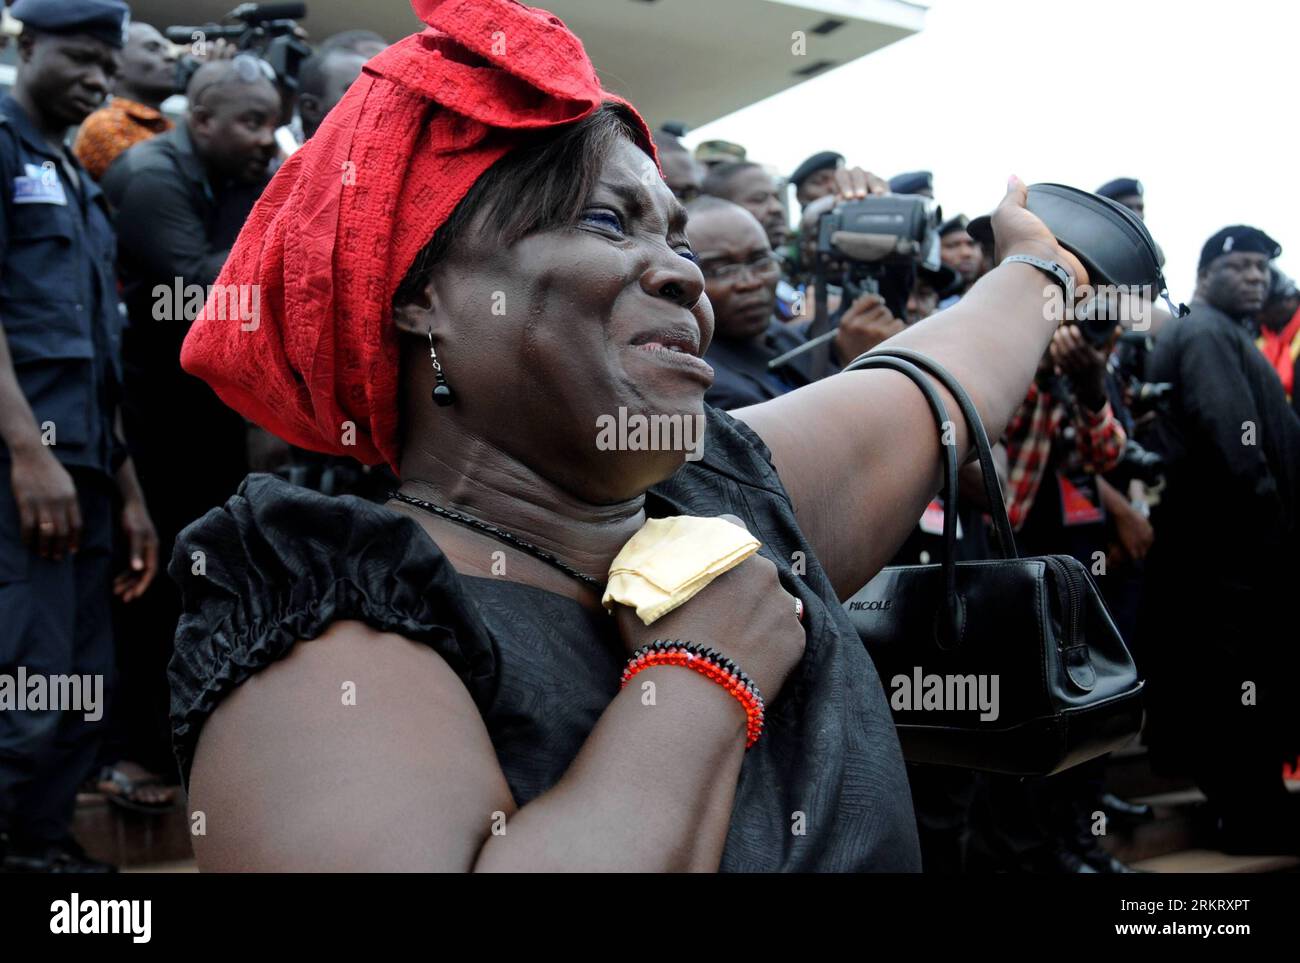 Bildnummer: 58325206  Datum: 08.08.2012  Copyright: imago/Xinhua (120808) -- ACCRA, Aug. 8, 2012 (Xinhua) -- A Ghana s woman weeps outside the State Banquet Hall after she bid farewell to the remains of Ghana s late president John Evans Atta Mills in Accra, capital of Ghana, on Aug. 8, 2012. The late President Mills, 68, died suddenly on July 24, at the 37th Military Hospital after falling ill. (Xinhua/Shao Haijun) GHANA-ACCRA-LATE PRESIDENT-FUNERAL PUBLICATIONxNOTxINxCHN People Politik Gedenken Trauer xjh x0x premiumd 2012 quer     58325206 Date 08 08 2012 Copyright Imago XINHUA  Accra Aug 8 Stock Photo